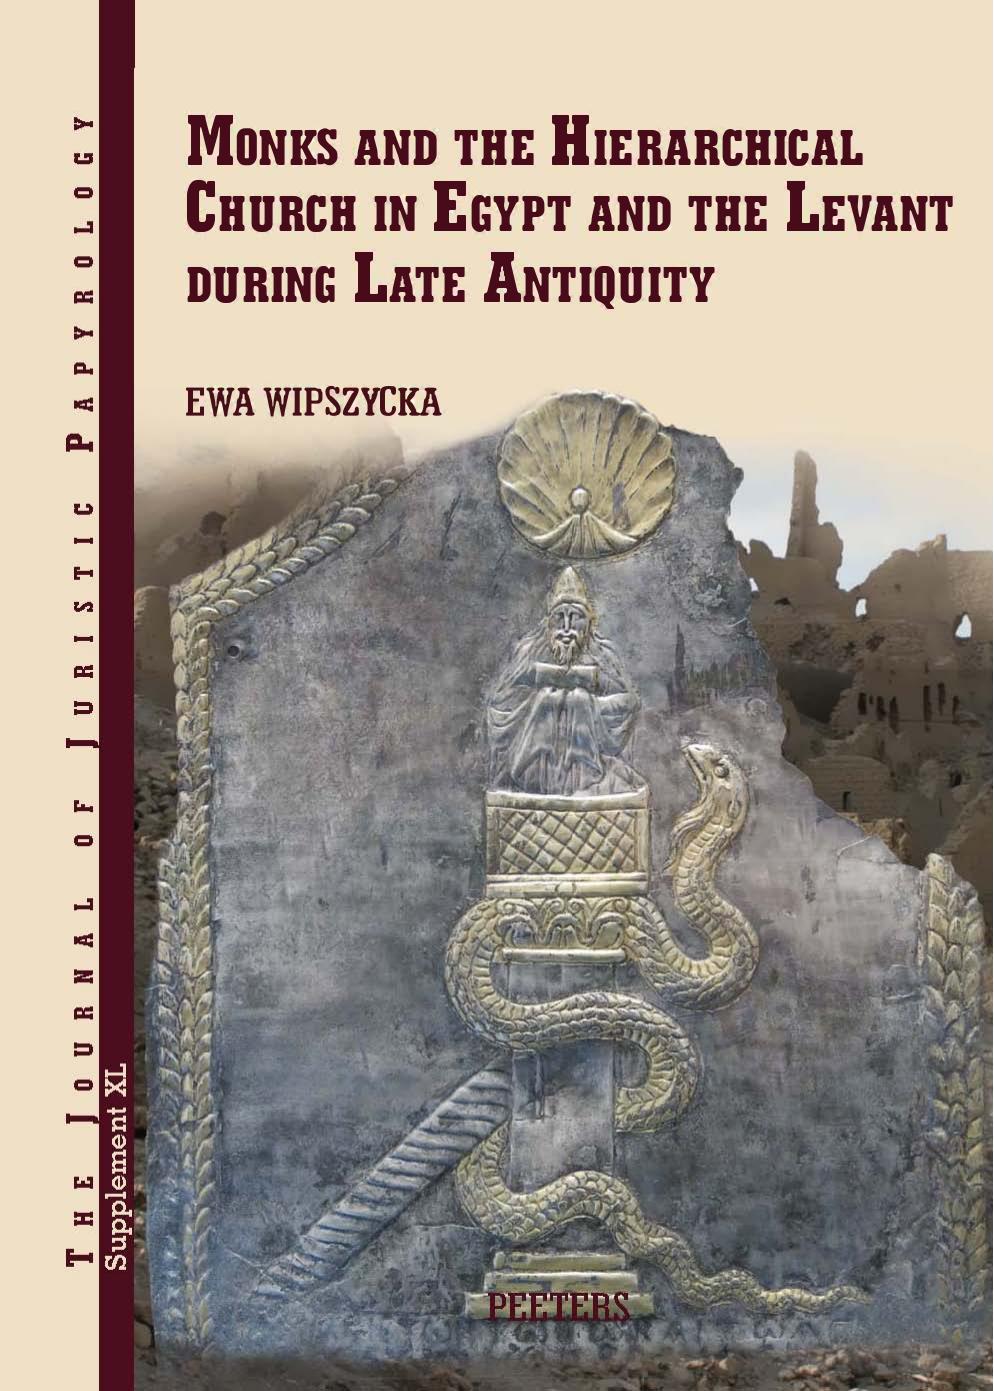 Monks and the Hierarchical Church in Egypt and the Levant During Late Antiquity: With a Chapter on Persian Christians in Late Antiquity by Adam ... of Juristic Papyrology Supplements, 40) by Ewa Wipszycka Adam Izdebski